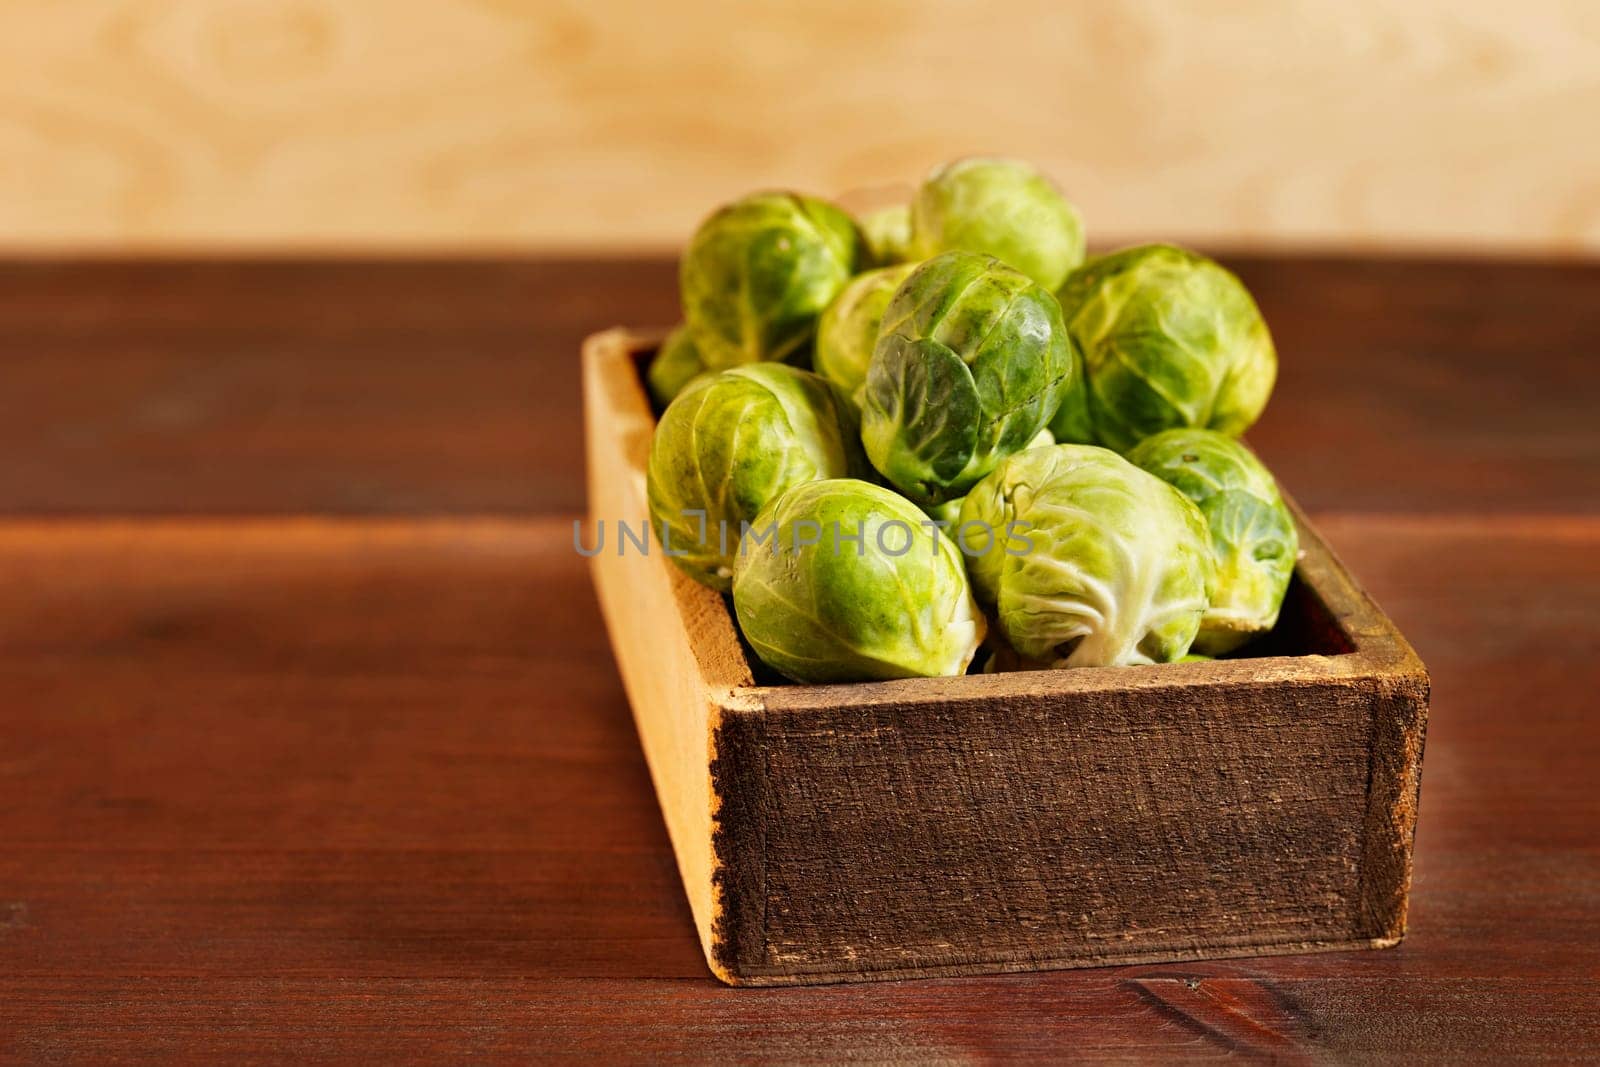  Wooden box with  green Brussel sprouts on table , brassica oleracea